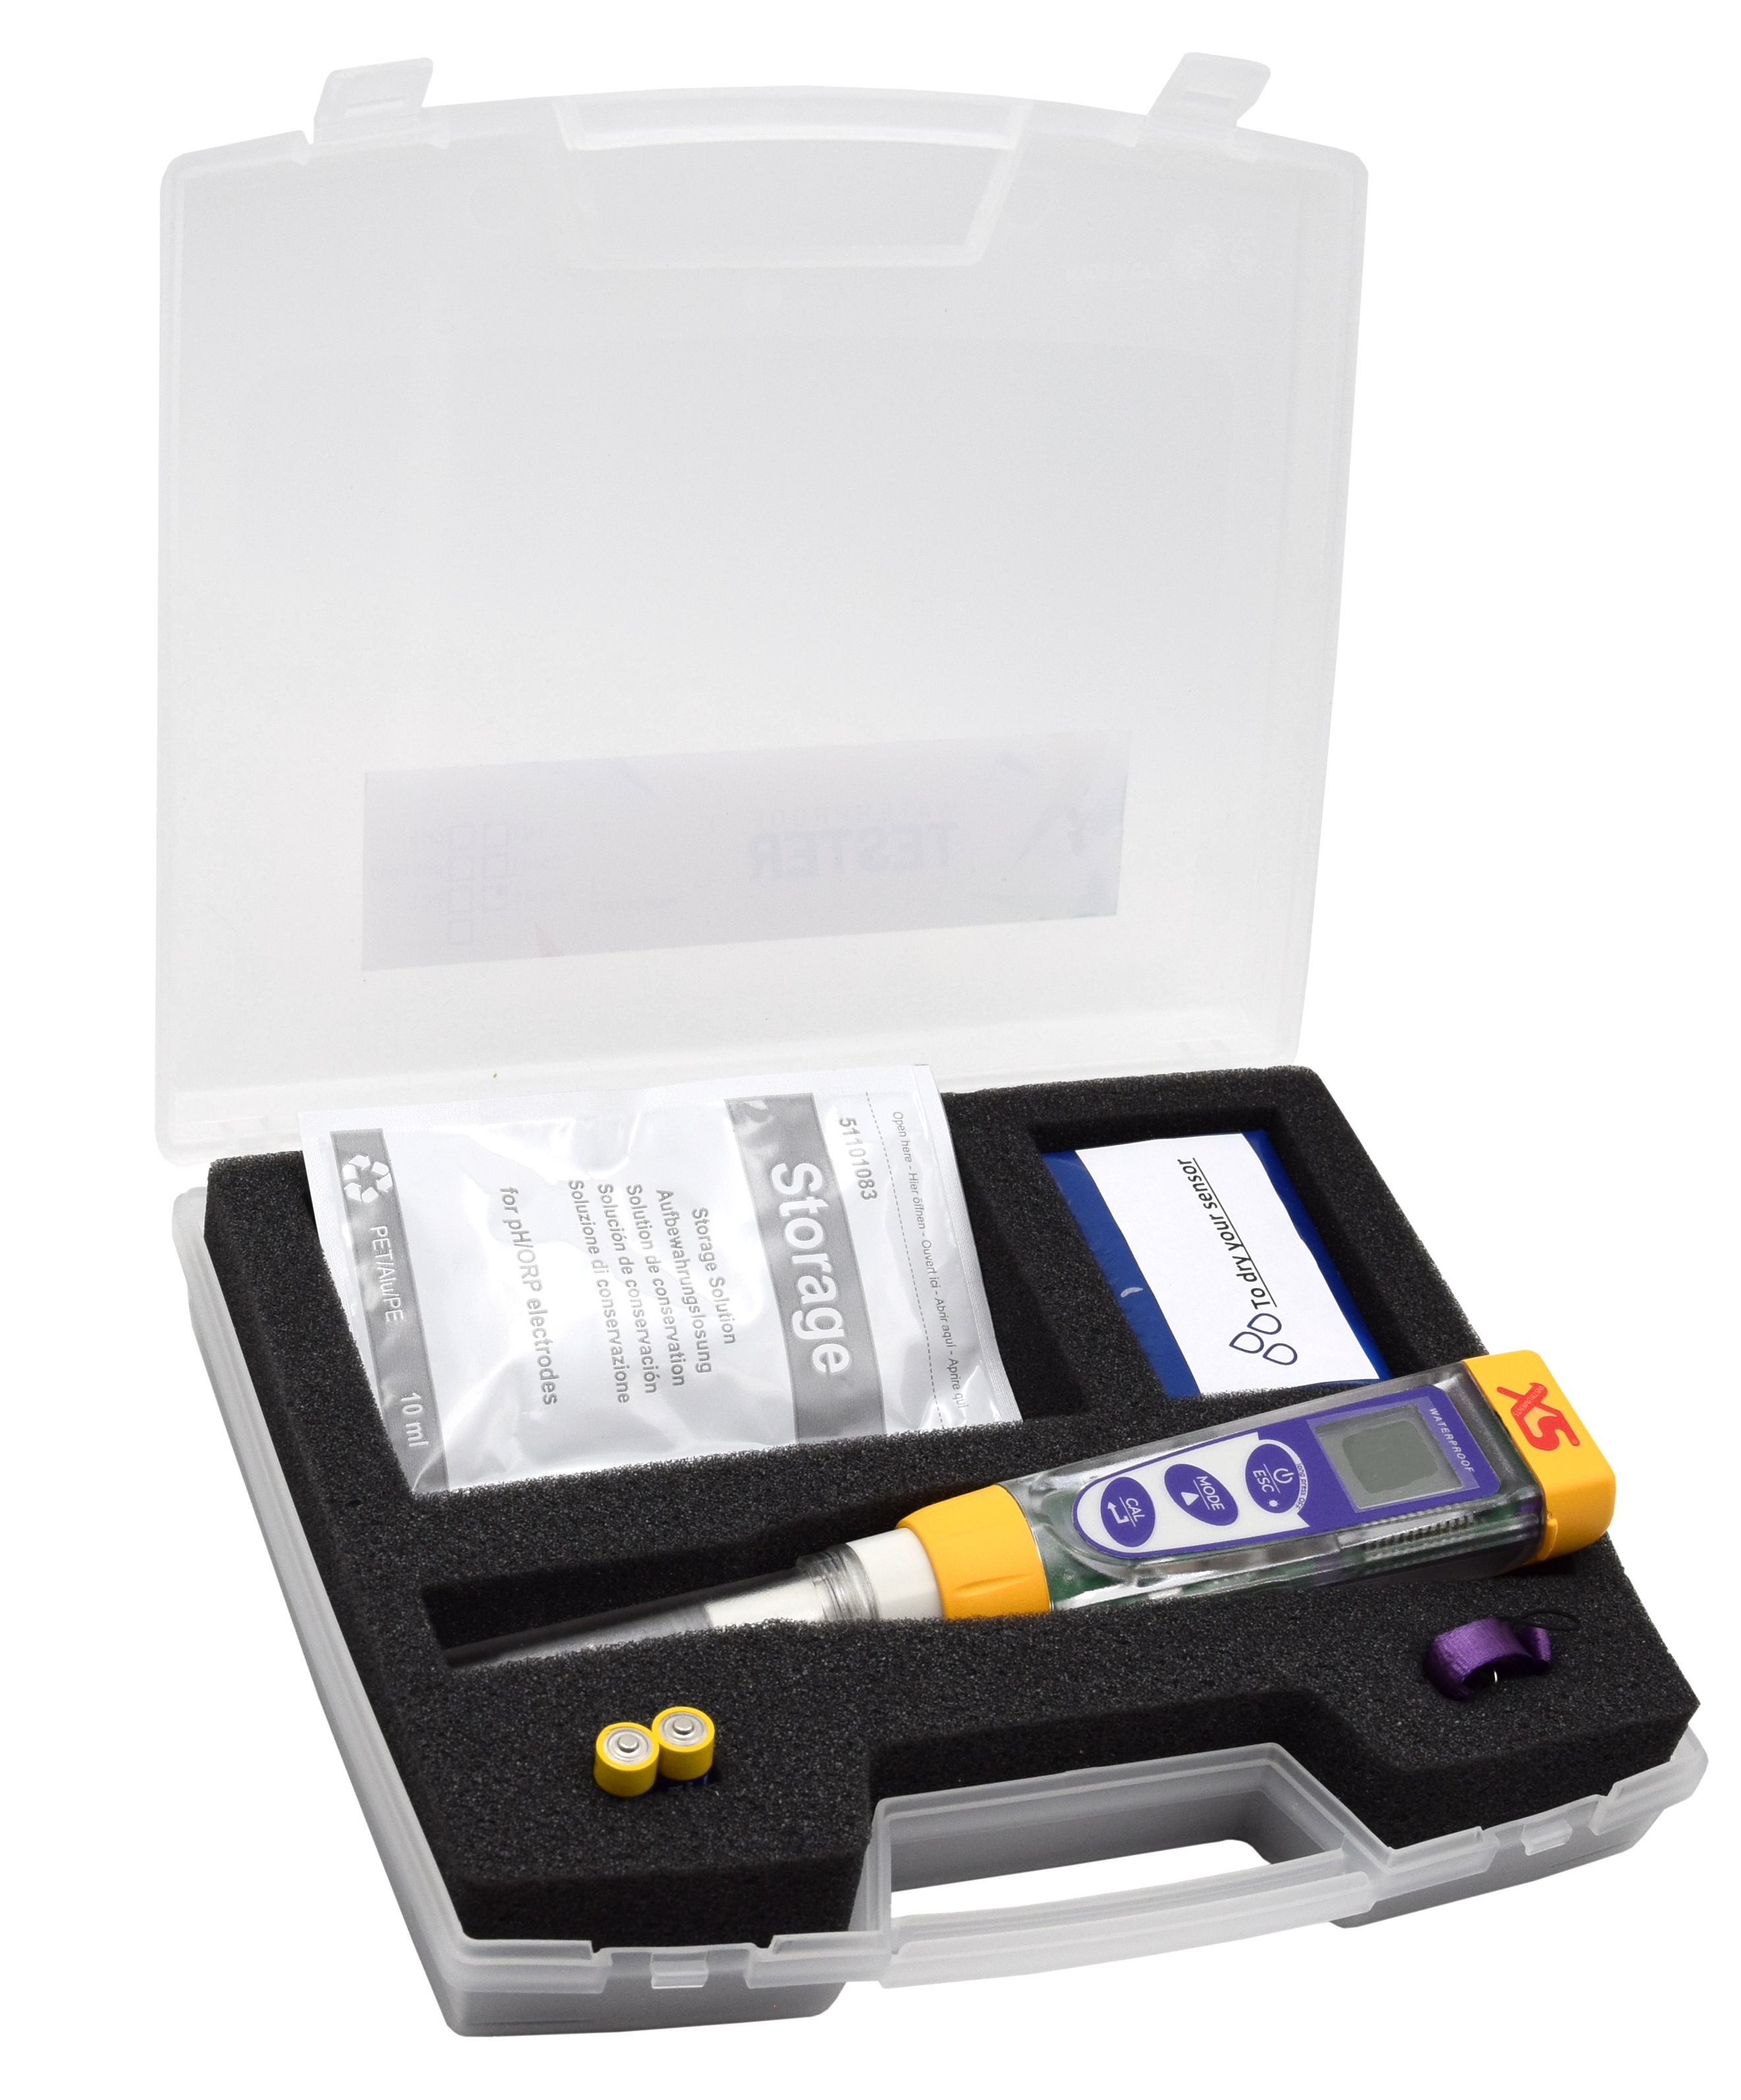 XS ORP 5 Tester in carrying case  - Measuring device for ORP value and temperature determination